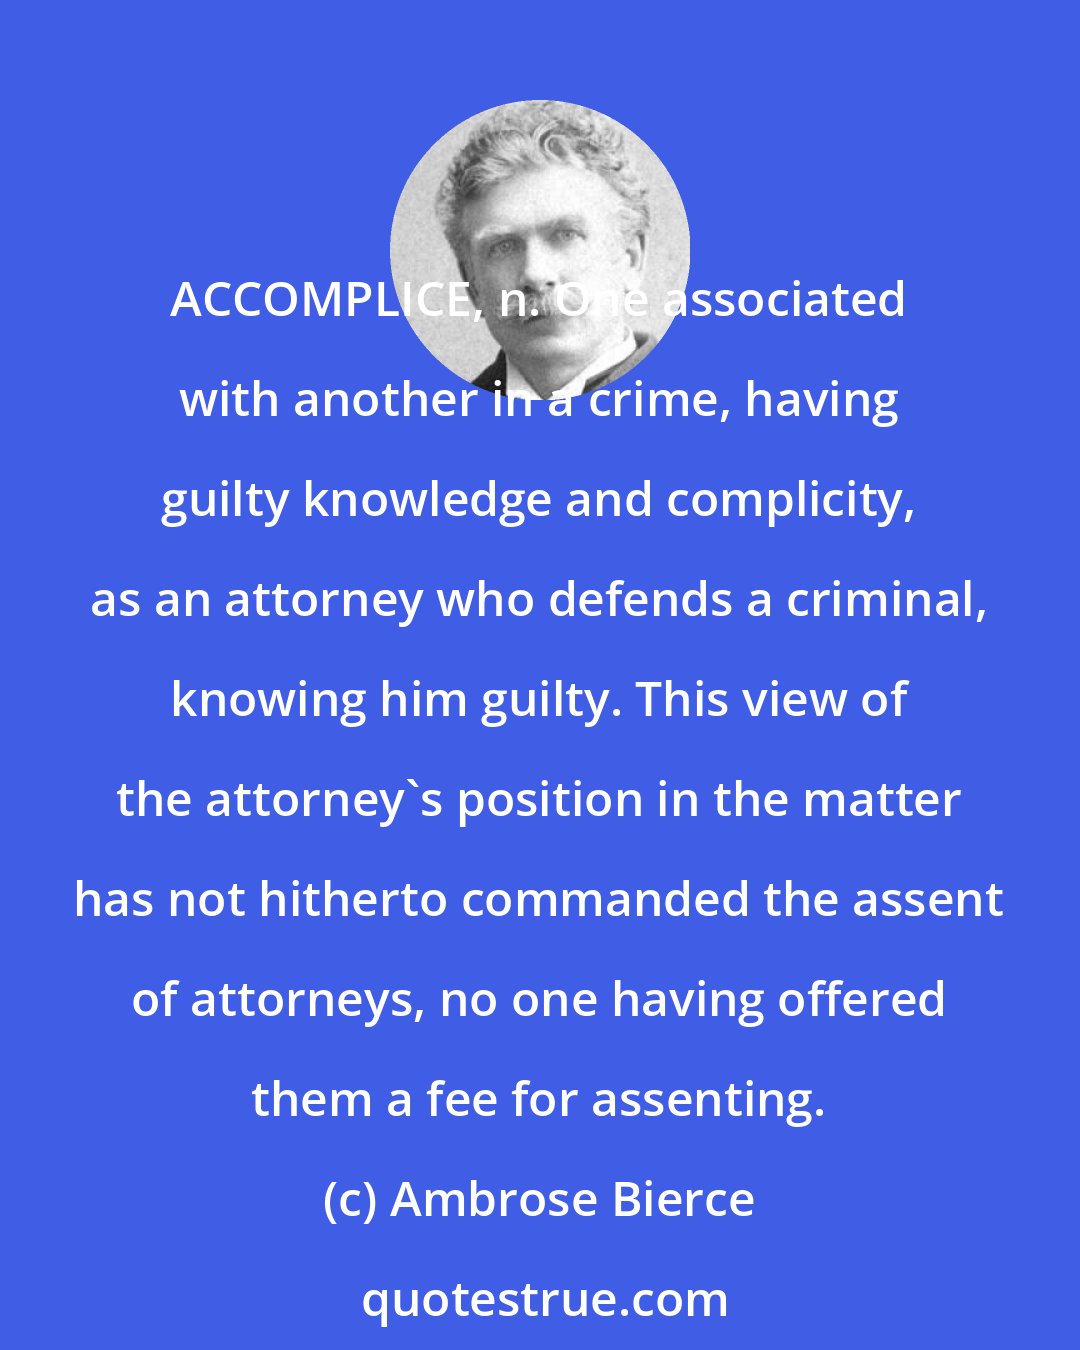 Ambrose Bierce: ACCOMPLICE, n. One associated with another in a crime, having guilty knowledge and complicity, as an attorney who defends a criminal, knowing him guilty. This view of the attorney's position in the matter has not hitherto commanded the assent of attorneys, no one having offered them a fee for assenting.